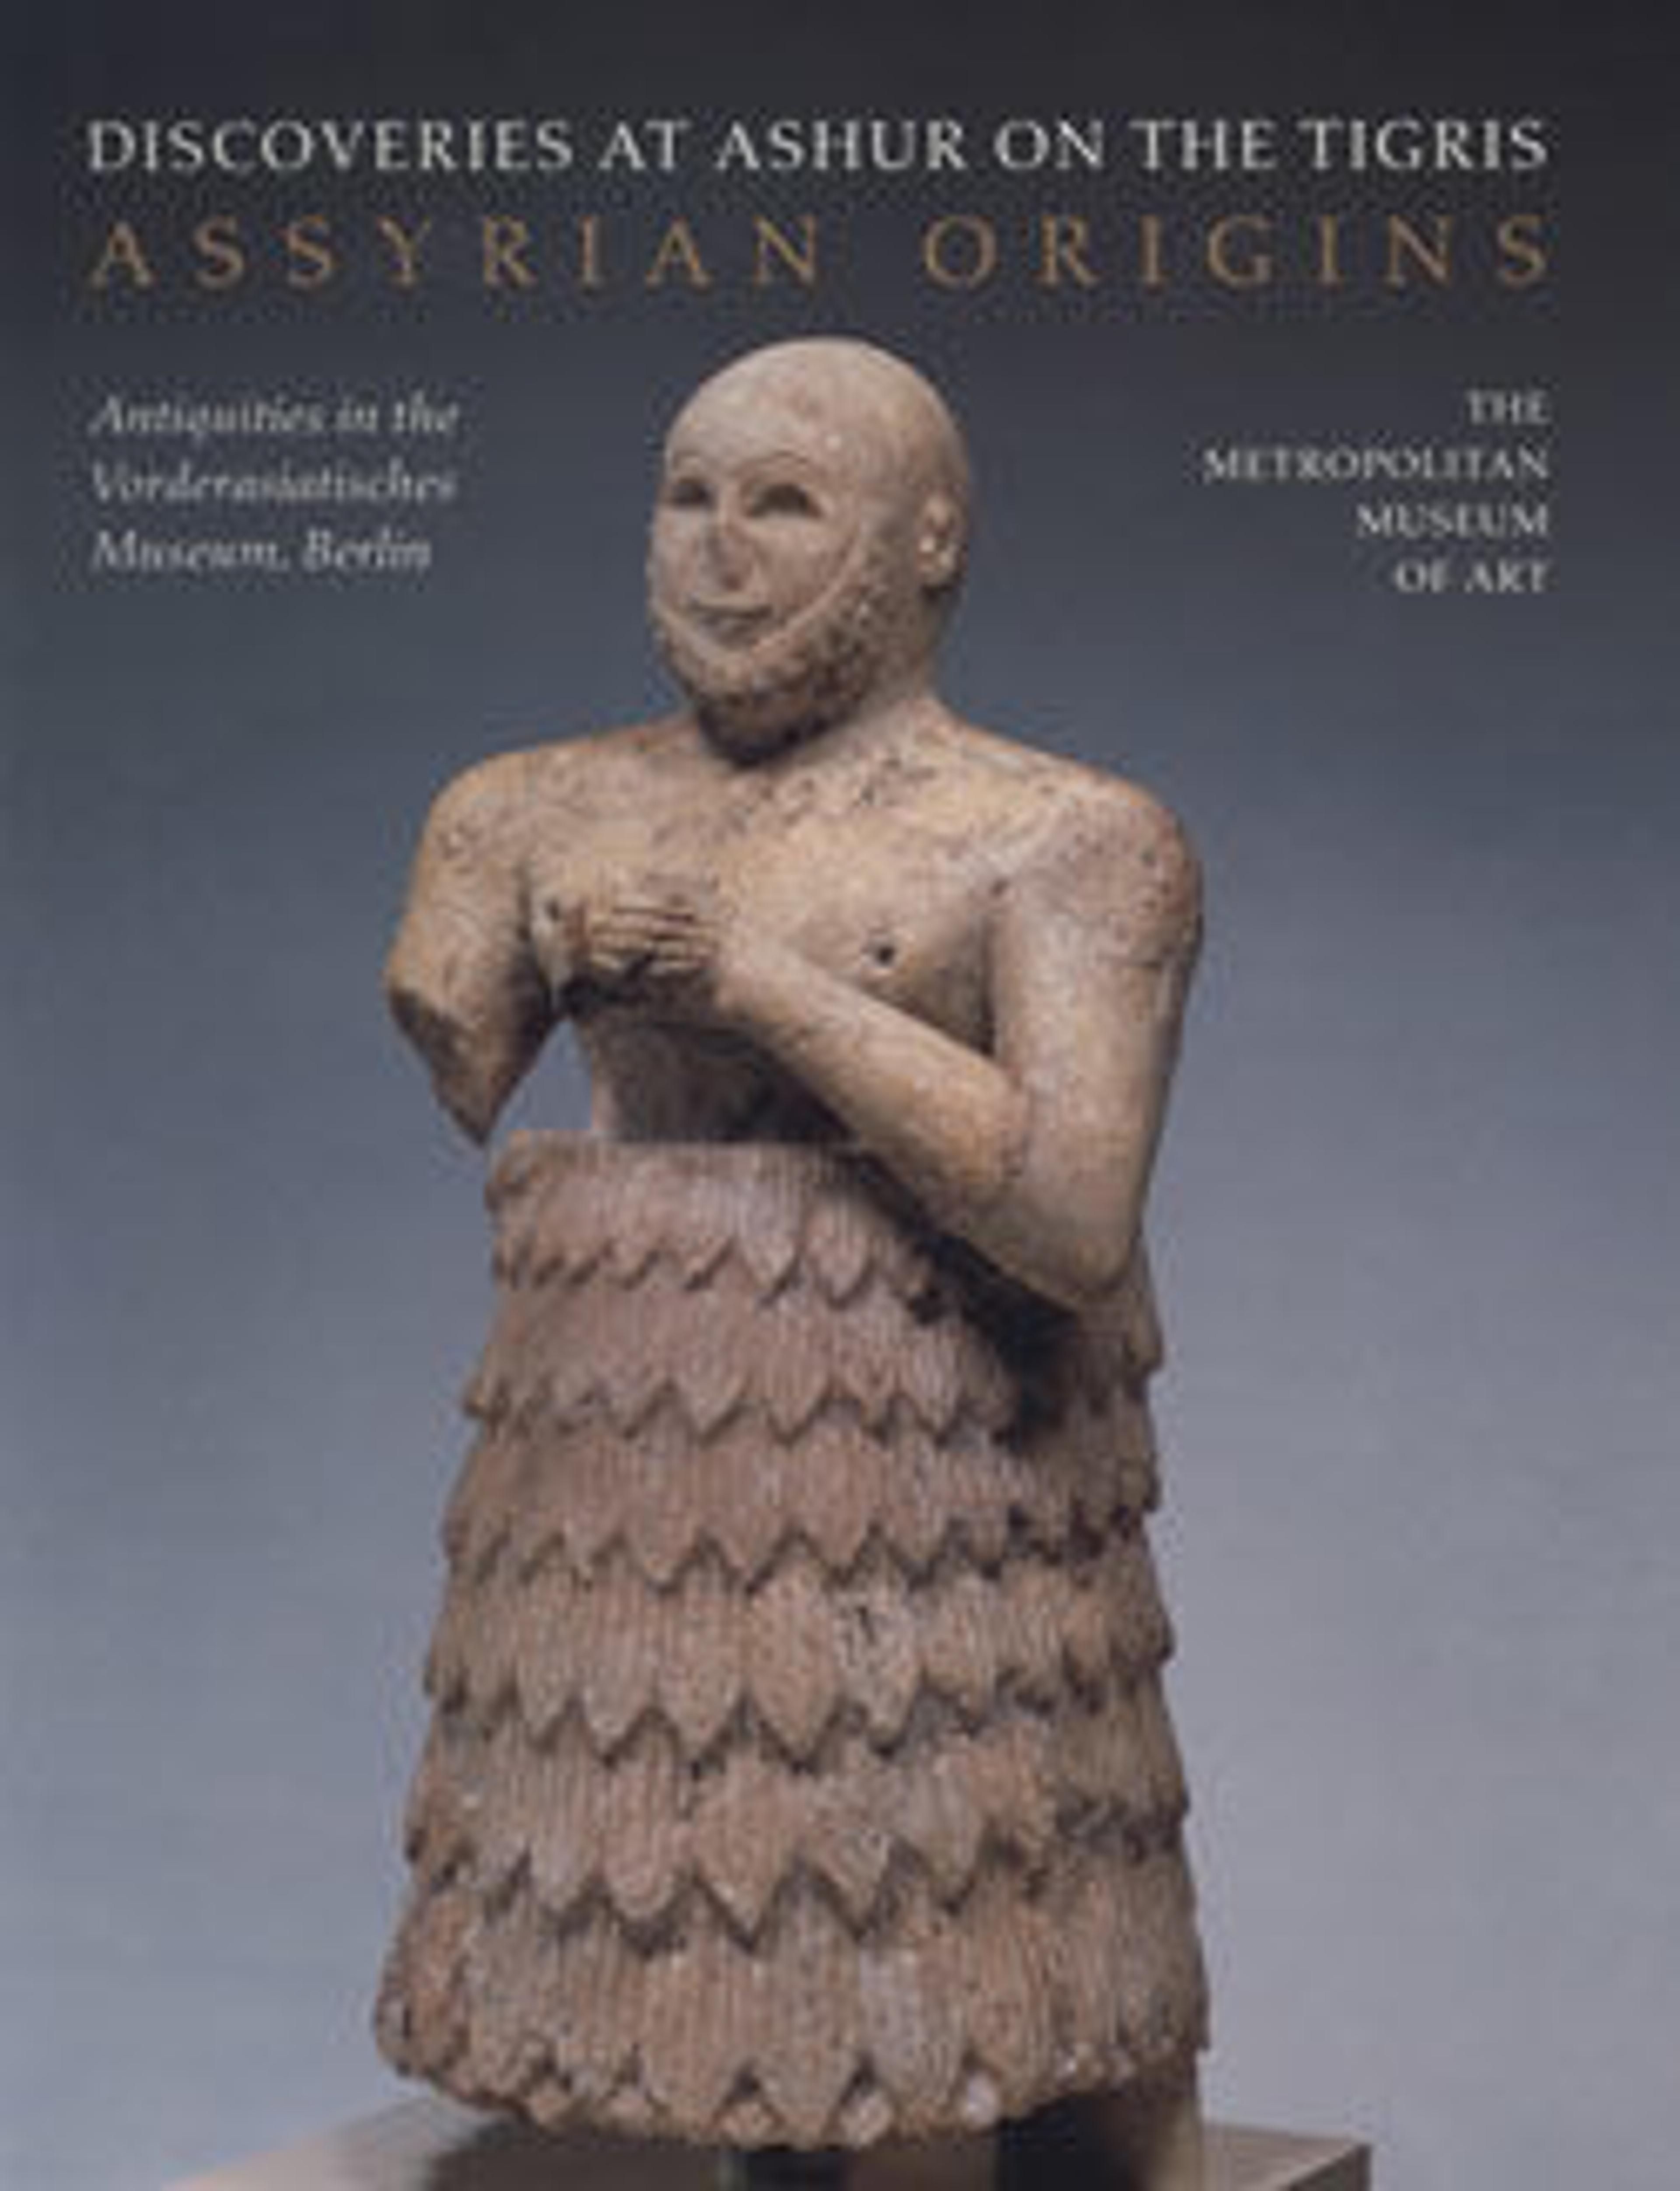 Assyrian Origins: Discoveries at Ashur on the Tigris: Antiquities in the Vorderasiatisches Museum, Berlin